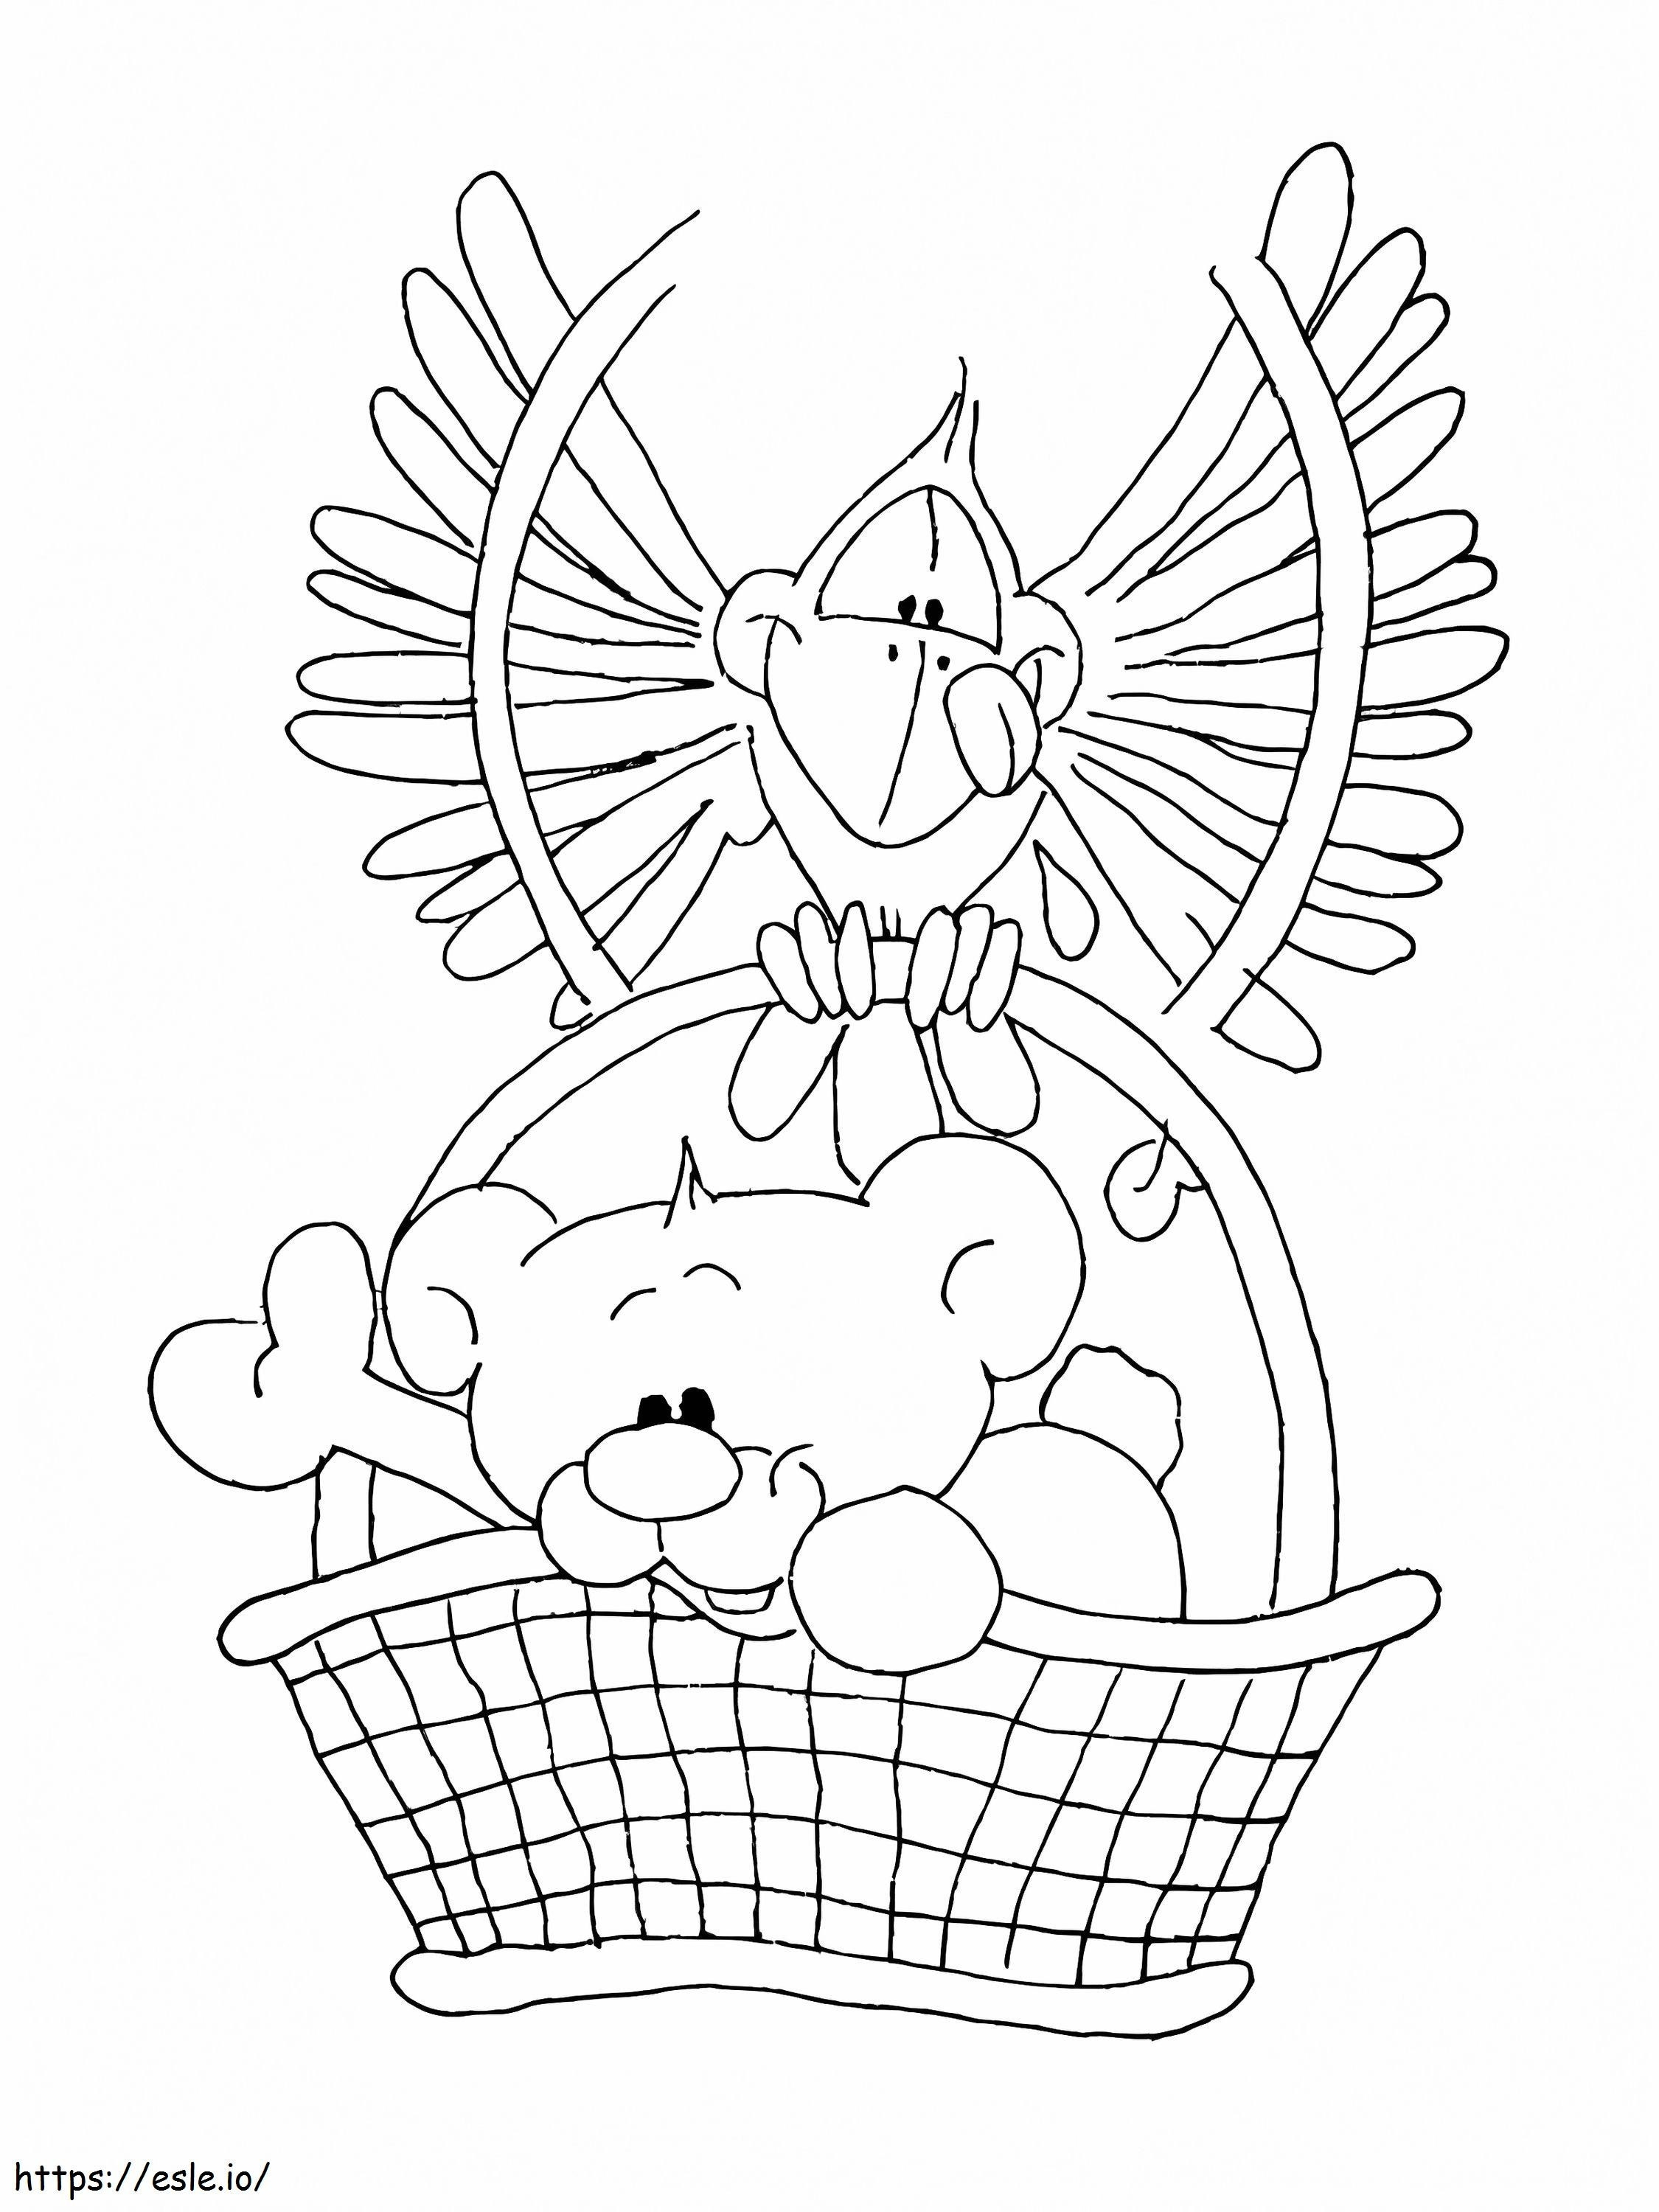 Pimboli In A Basket coloring page